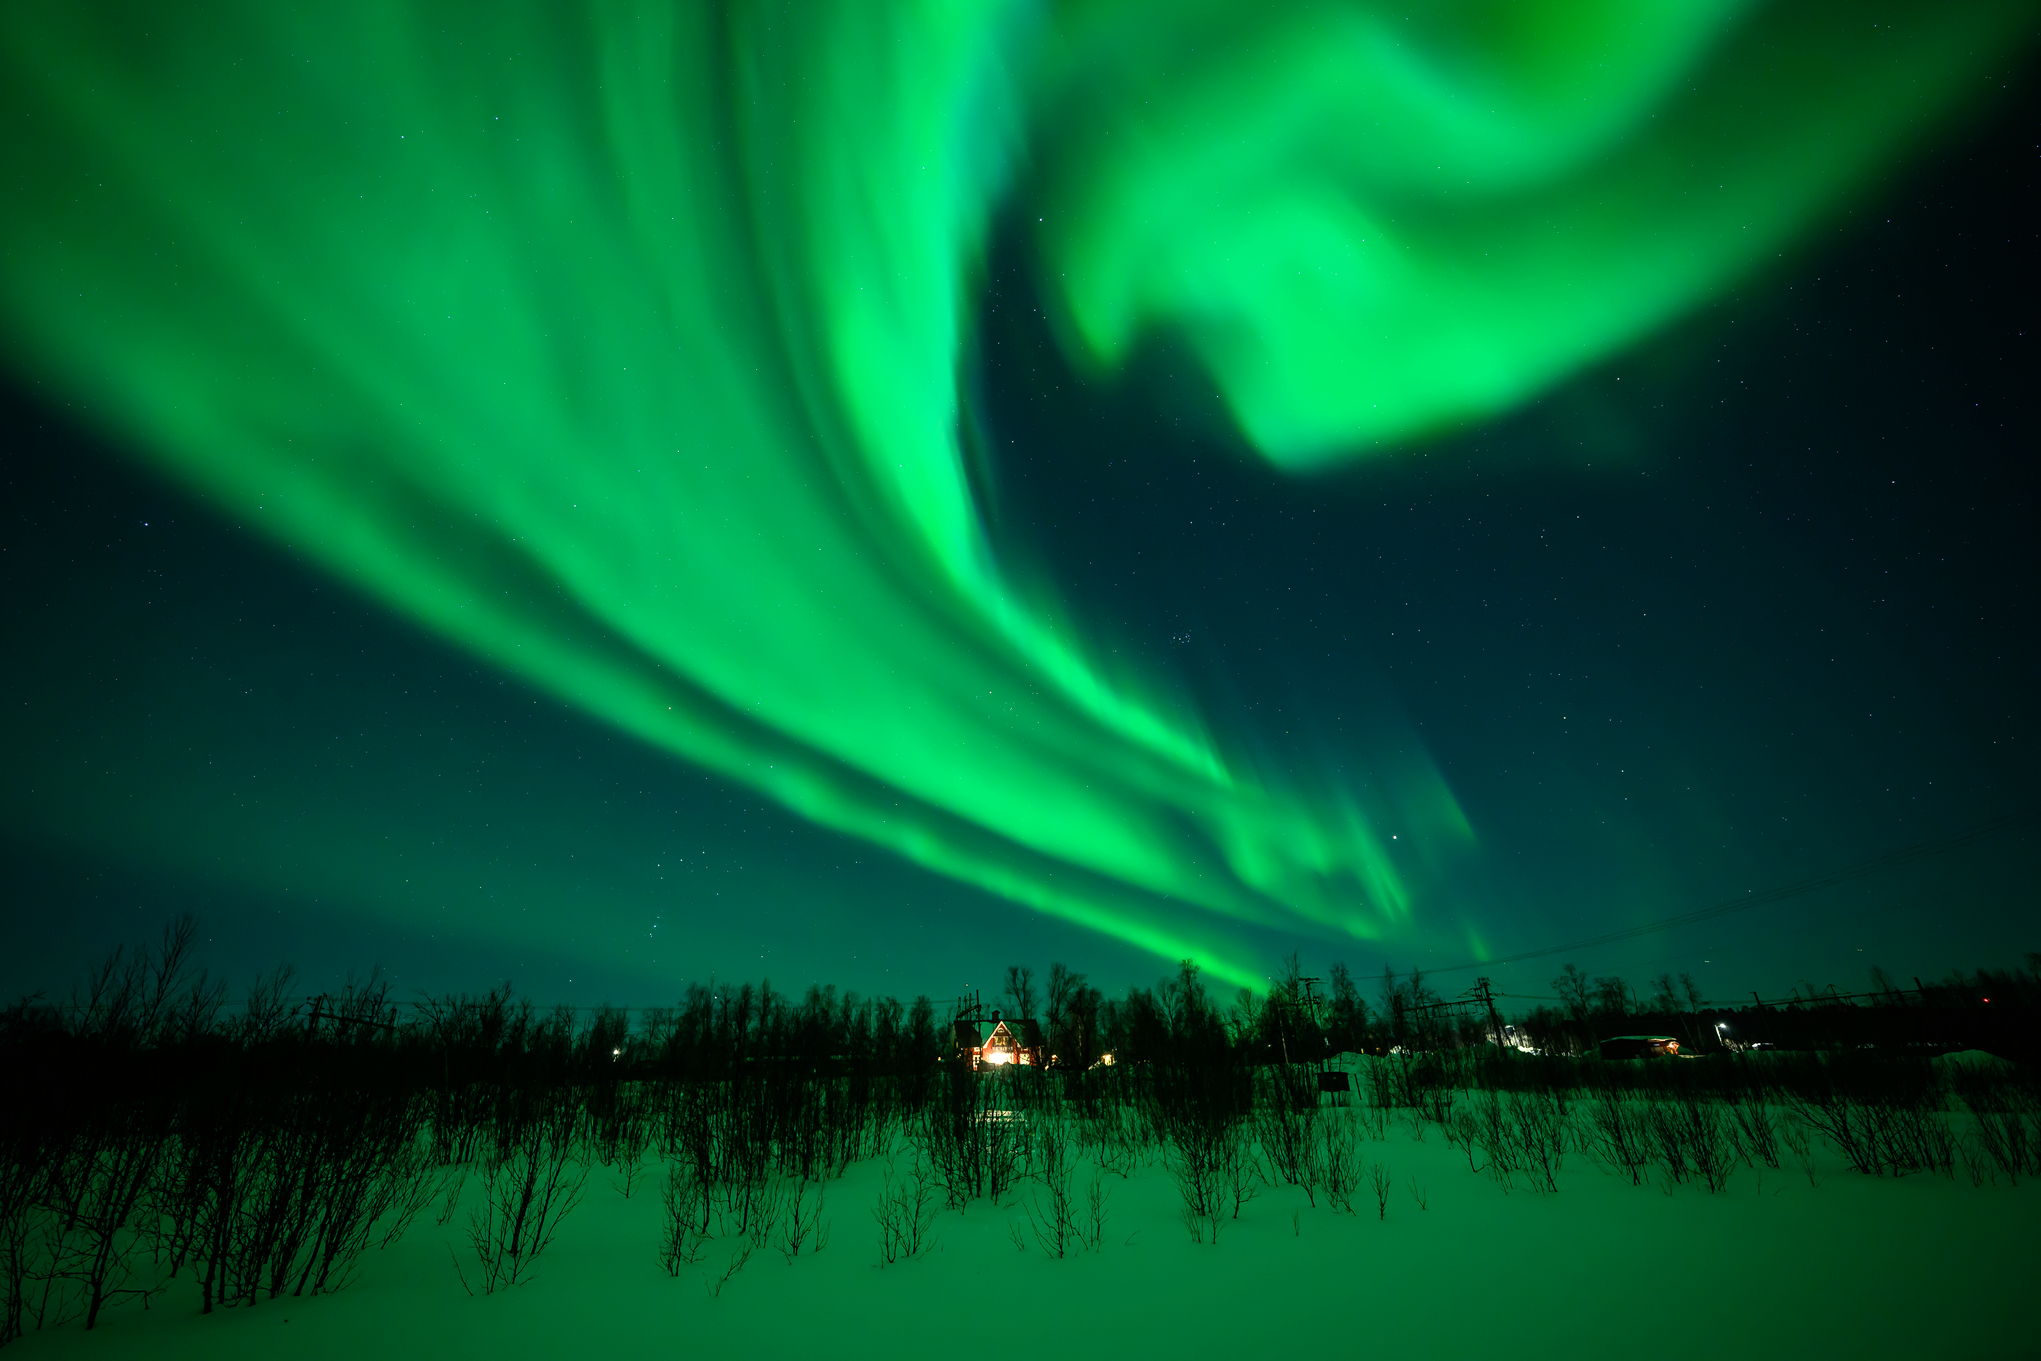 The Northern Lights, seen here in the sky above Kiruna, Sweden, on 7 March, can put on spectacular displays